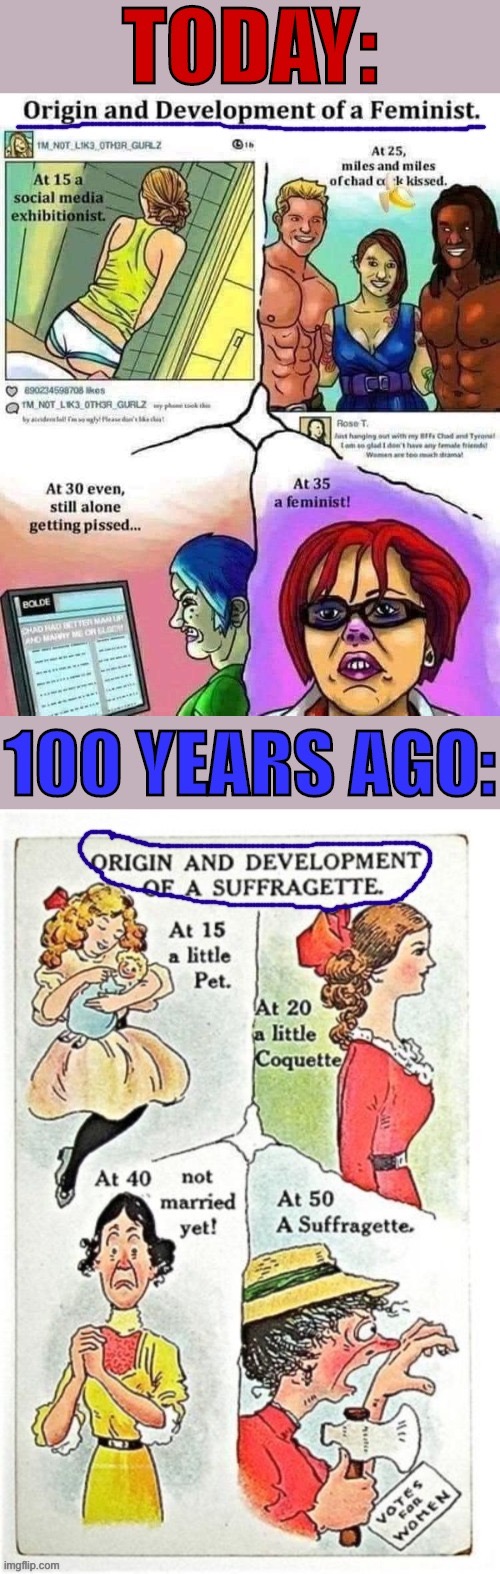 Eternal cringe upon thee | image tagged in sexism then now,sexism,misogyny,incel,alt right,feminism | made w/ Imgflip meme maker